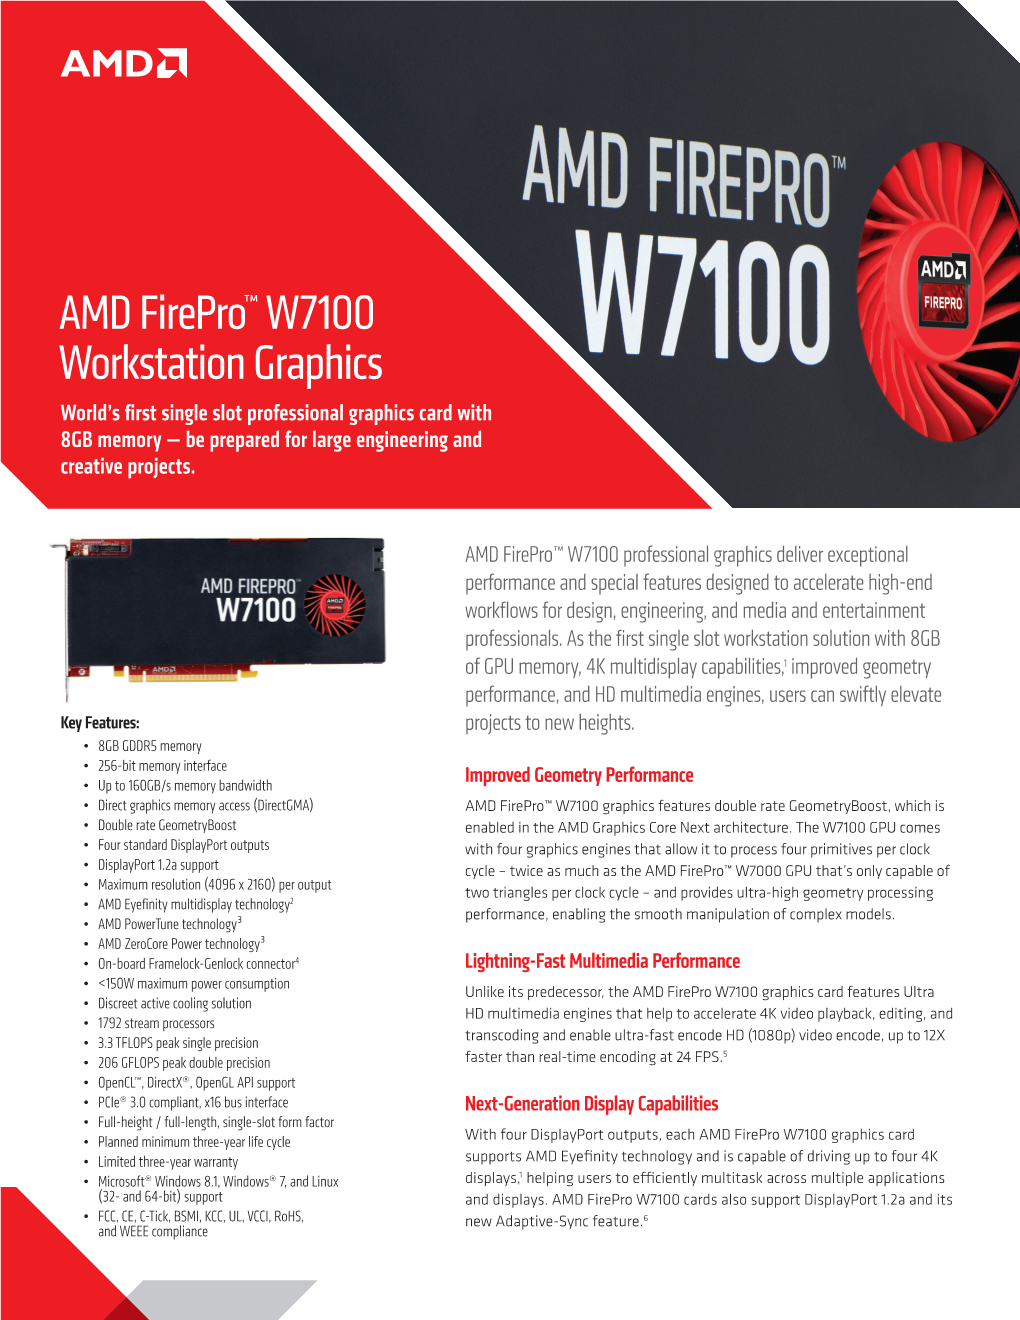 AMD Firepro™ W7100 Workstation Graphics World’S First Single Slot Professional Graphics Card with 8GB Memory — Be Prepared for Large Engineering and Creative Projects